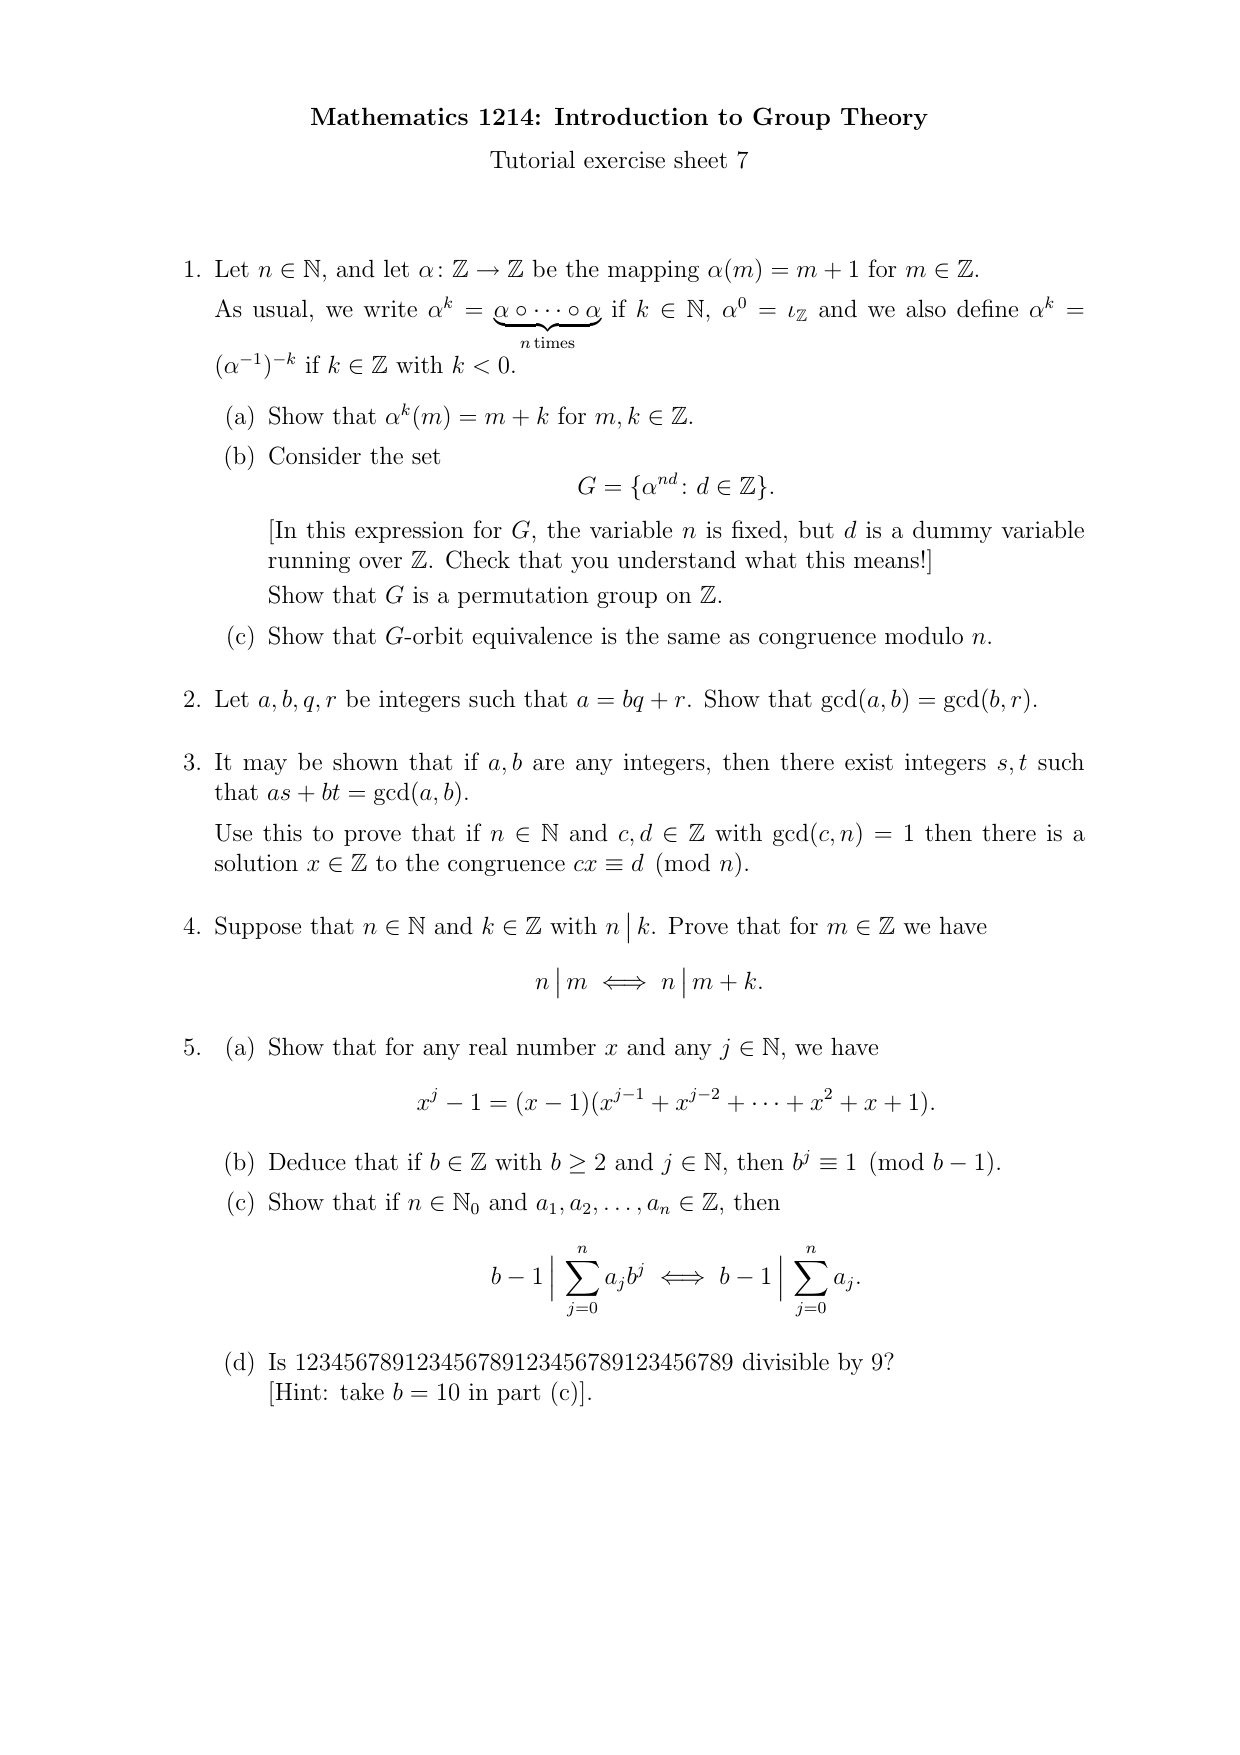 Mathematics 1214 Introduction To Group Theory Tutorial Exercise Sheet 7